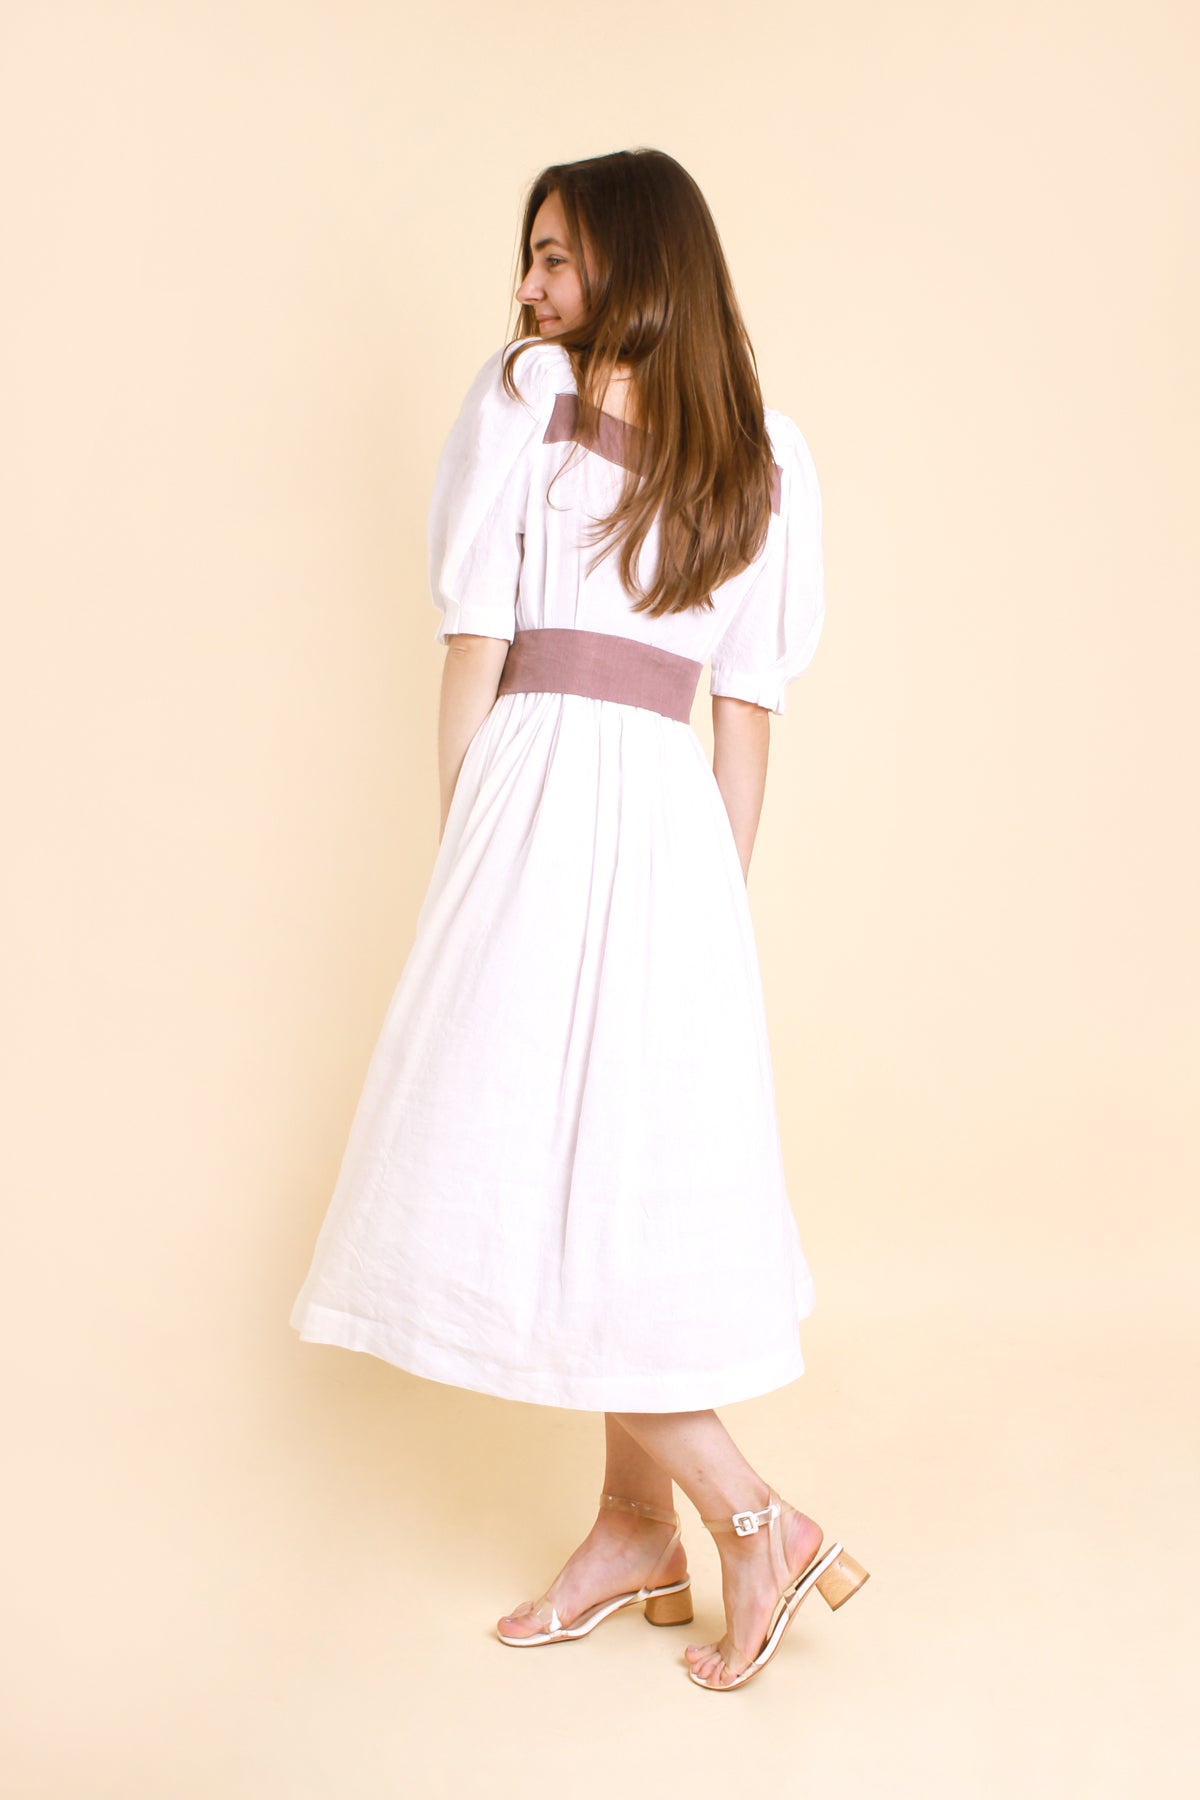  MIDI White Puff Sleeves Linen Dress MARIANNA made with high-quality linen-viscose fabric, features charming puff sleeves and buttons at the front for added flair. 